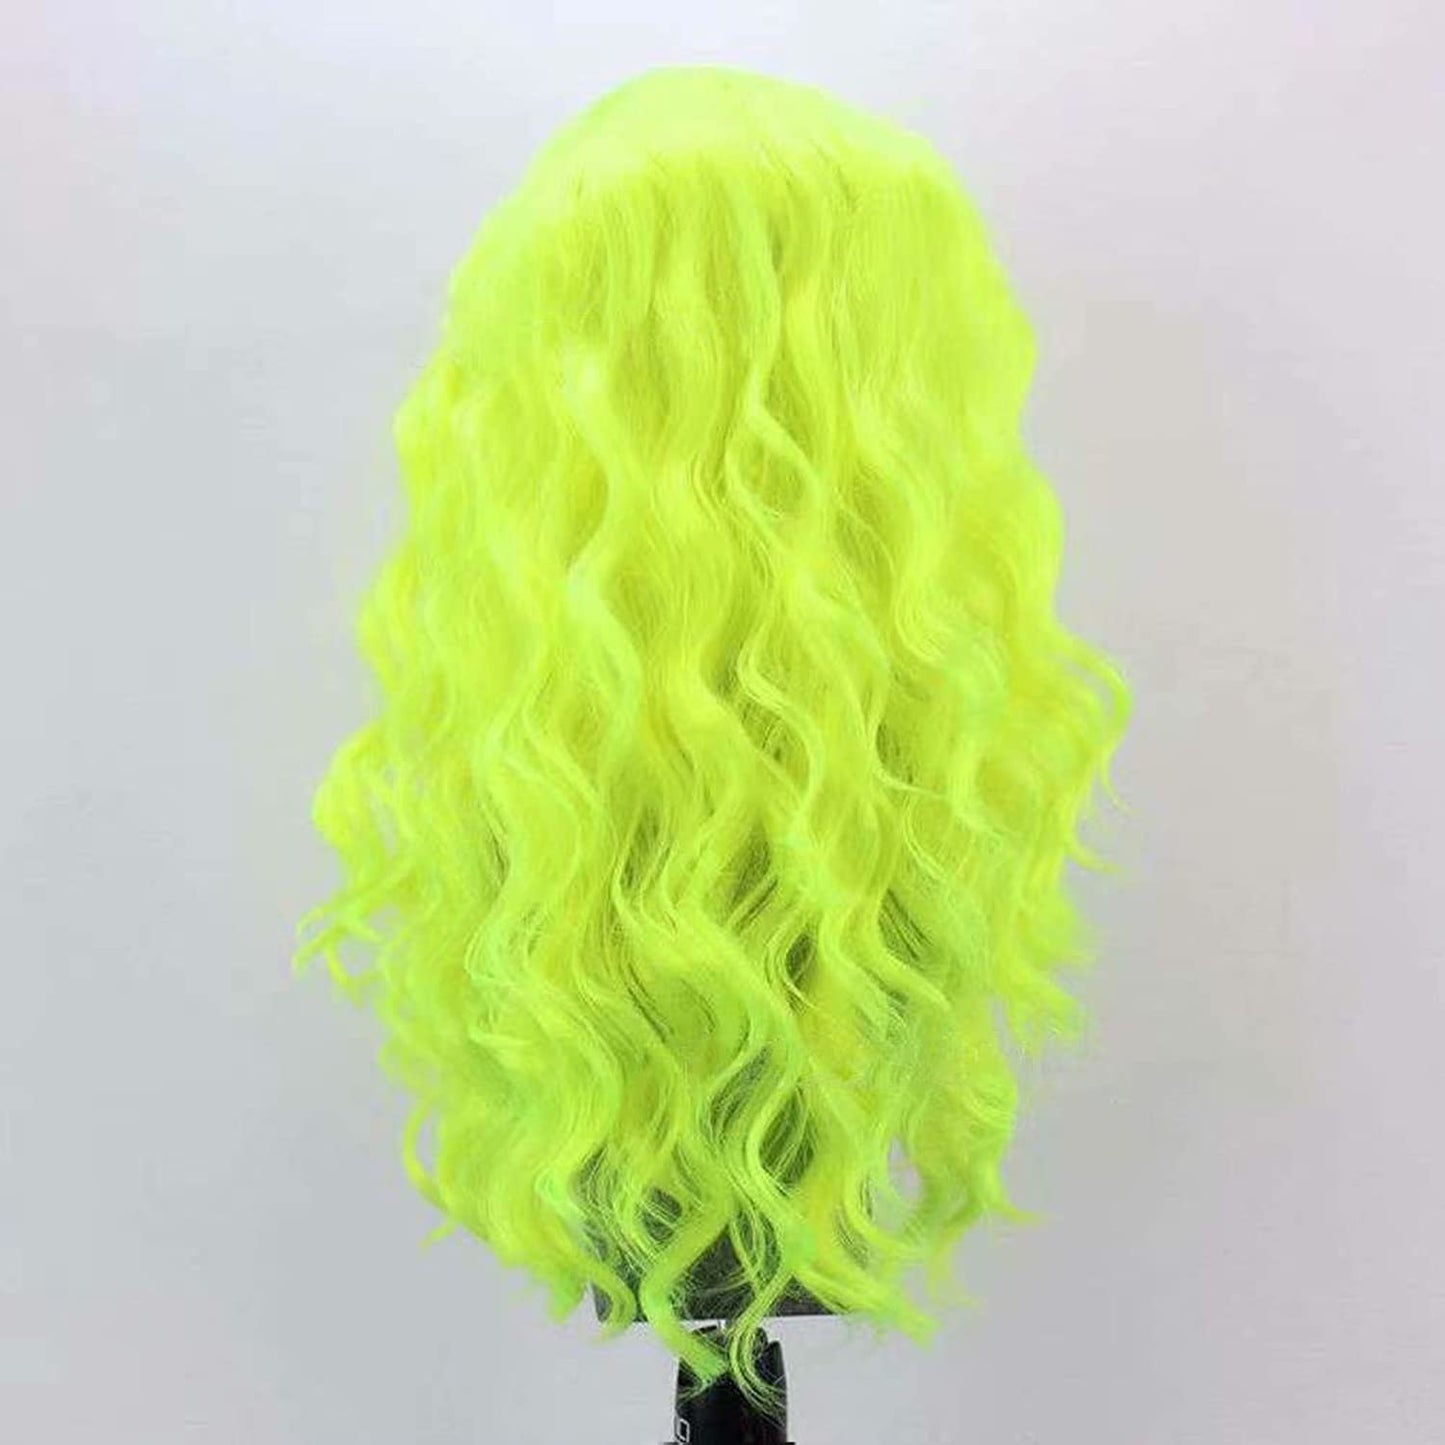 Fluorescent Bright Green Lace Front Wig, LONG CURLY neon hair wig